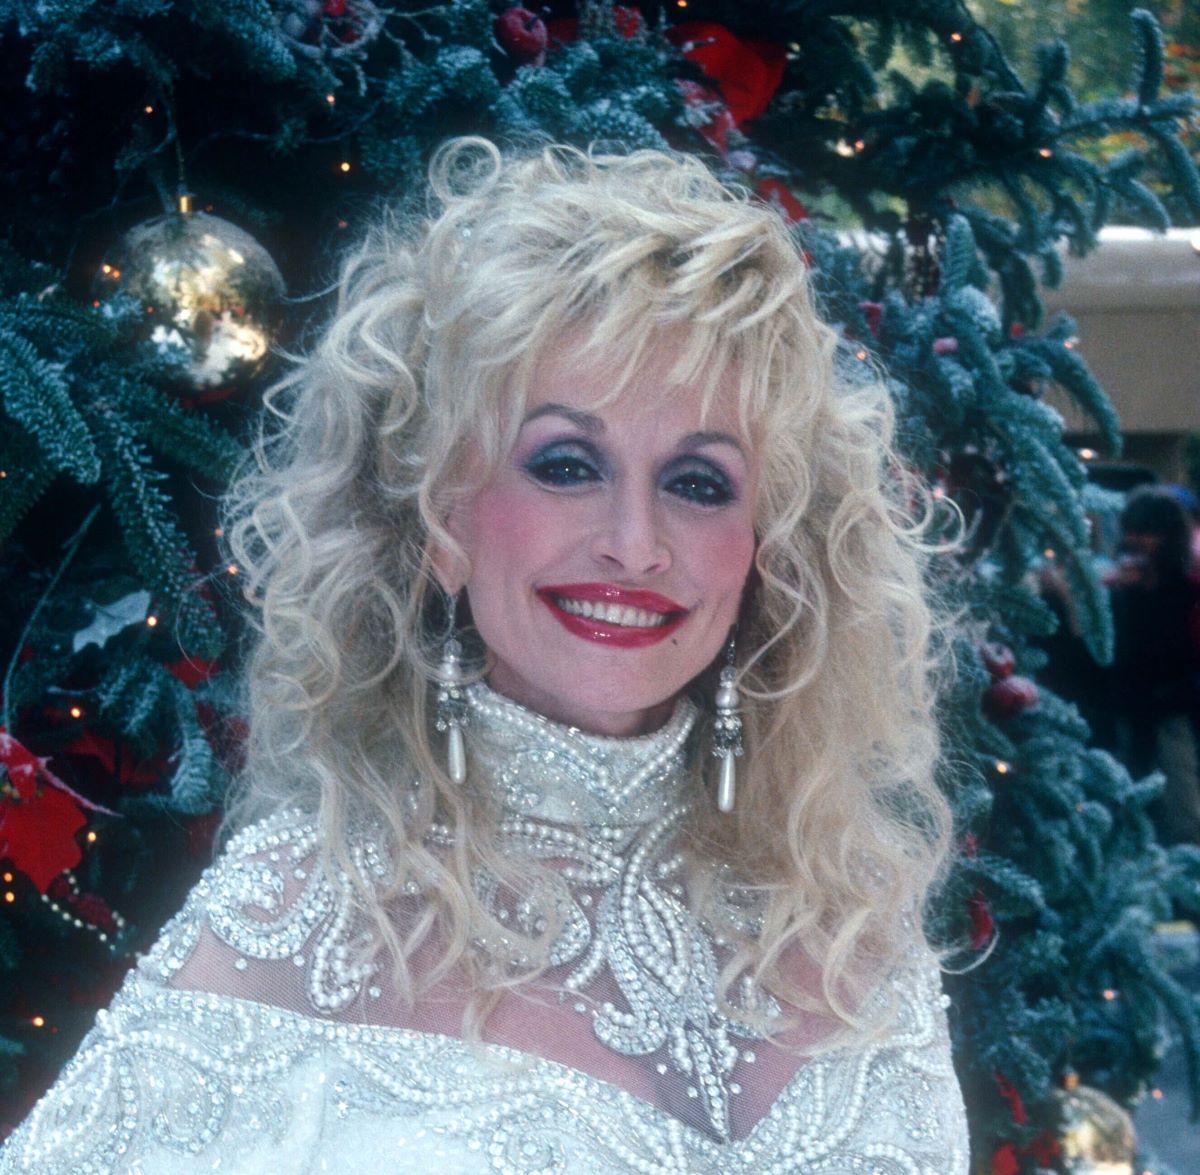 Dolly Parton wears a white dress and poses in front of a Christmas tree.